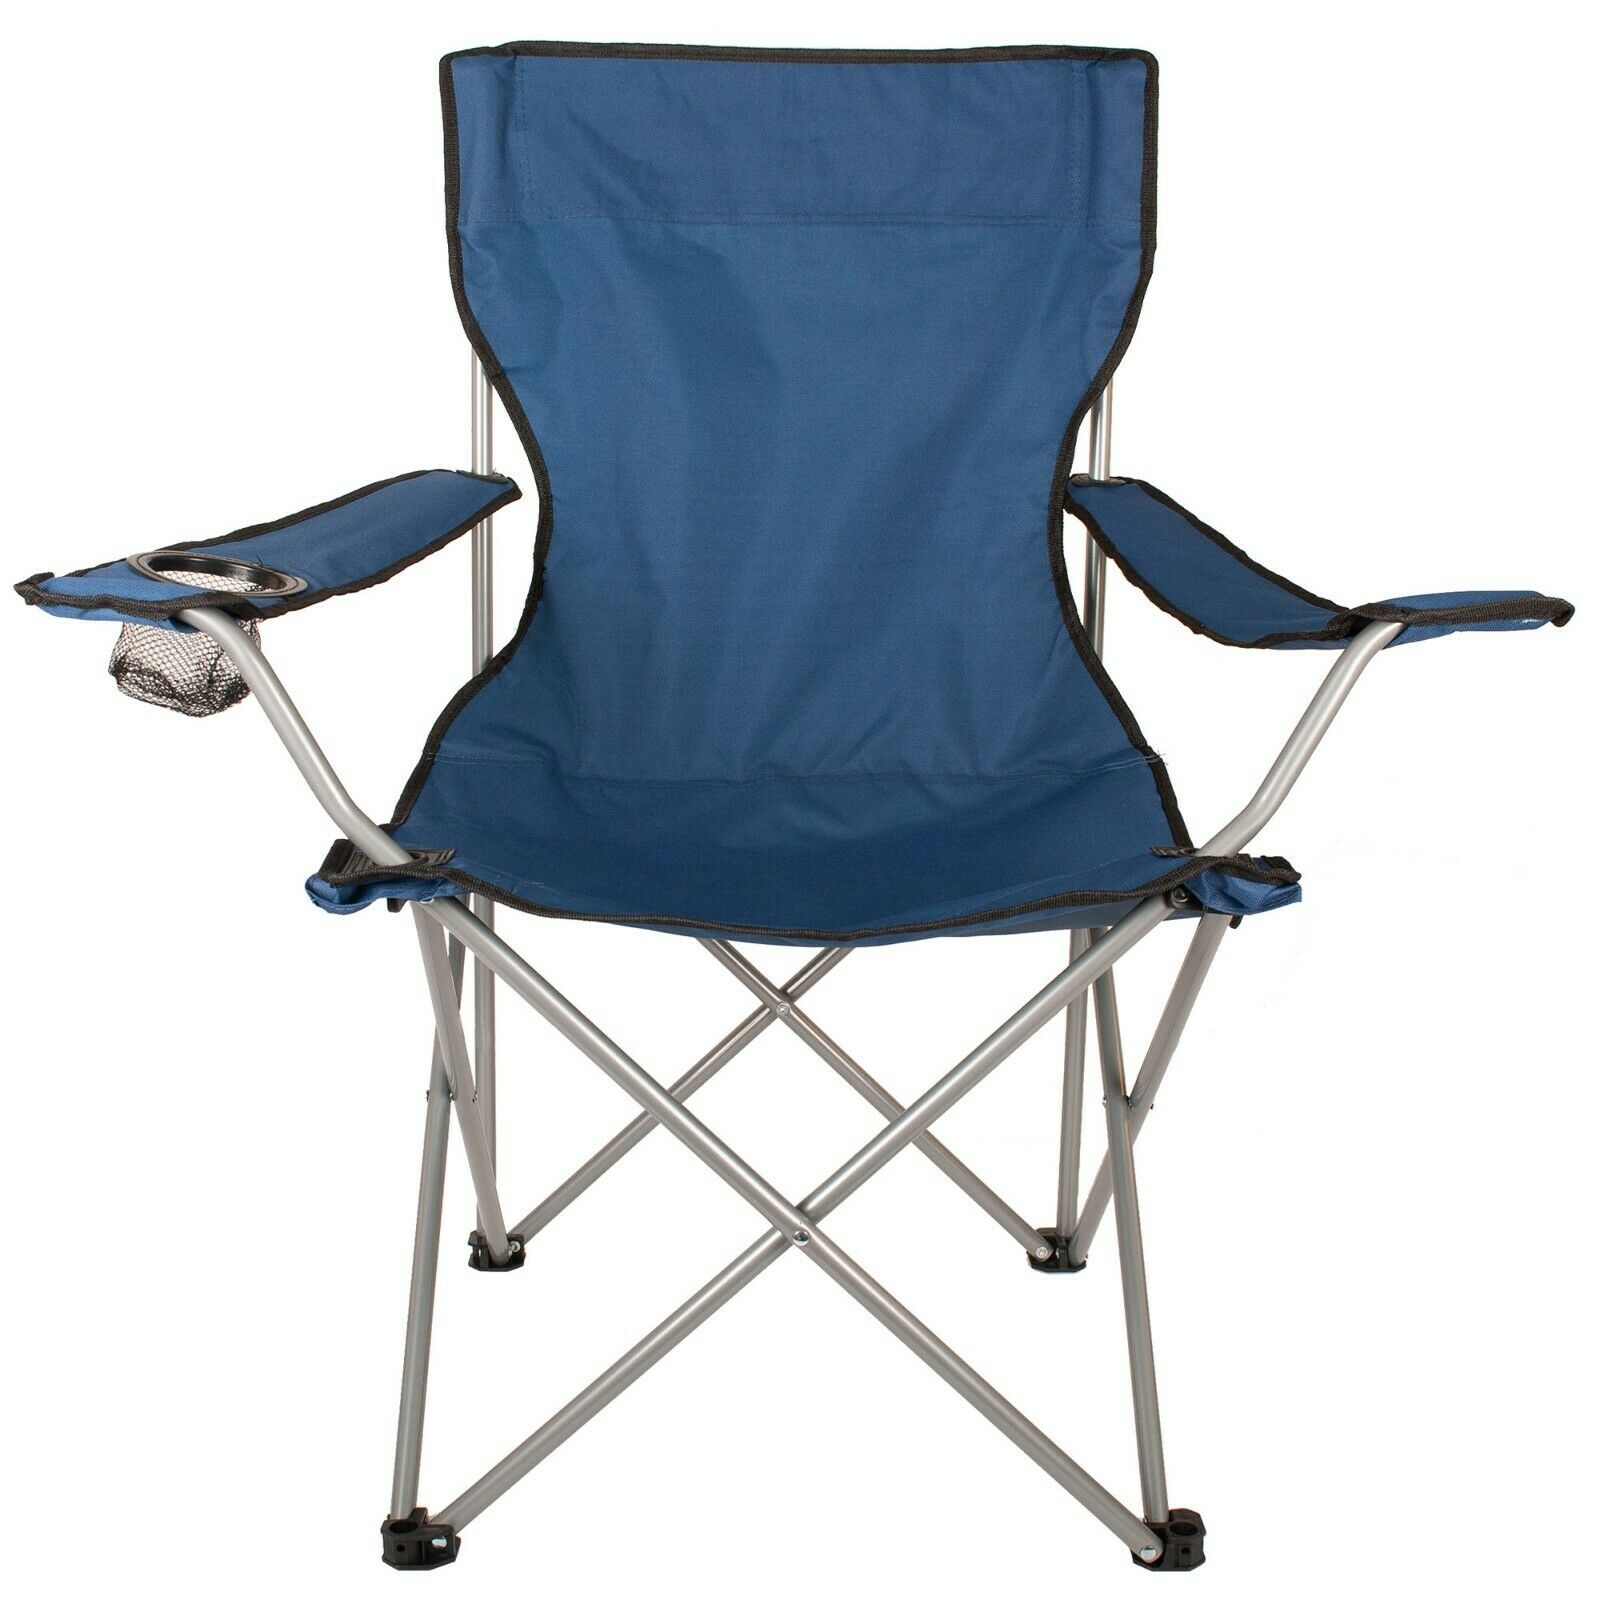 WFS™ Outdoors Folding Quad Chair with Carry Bag - 3 Color Variations!